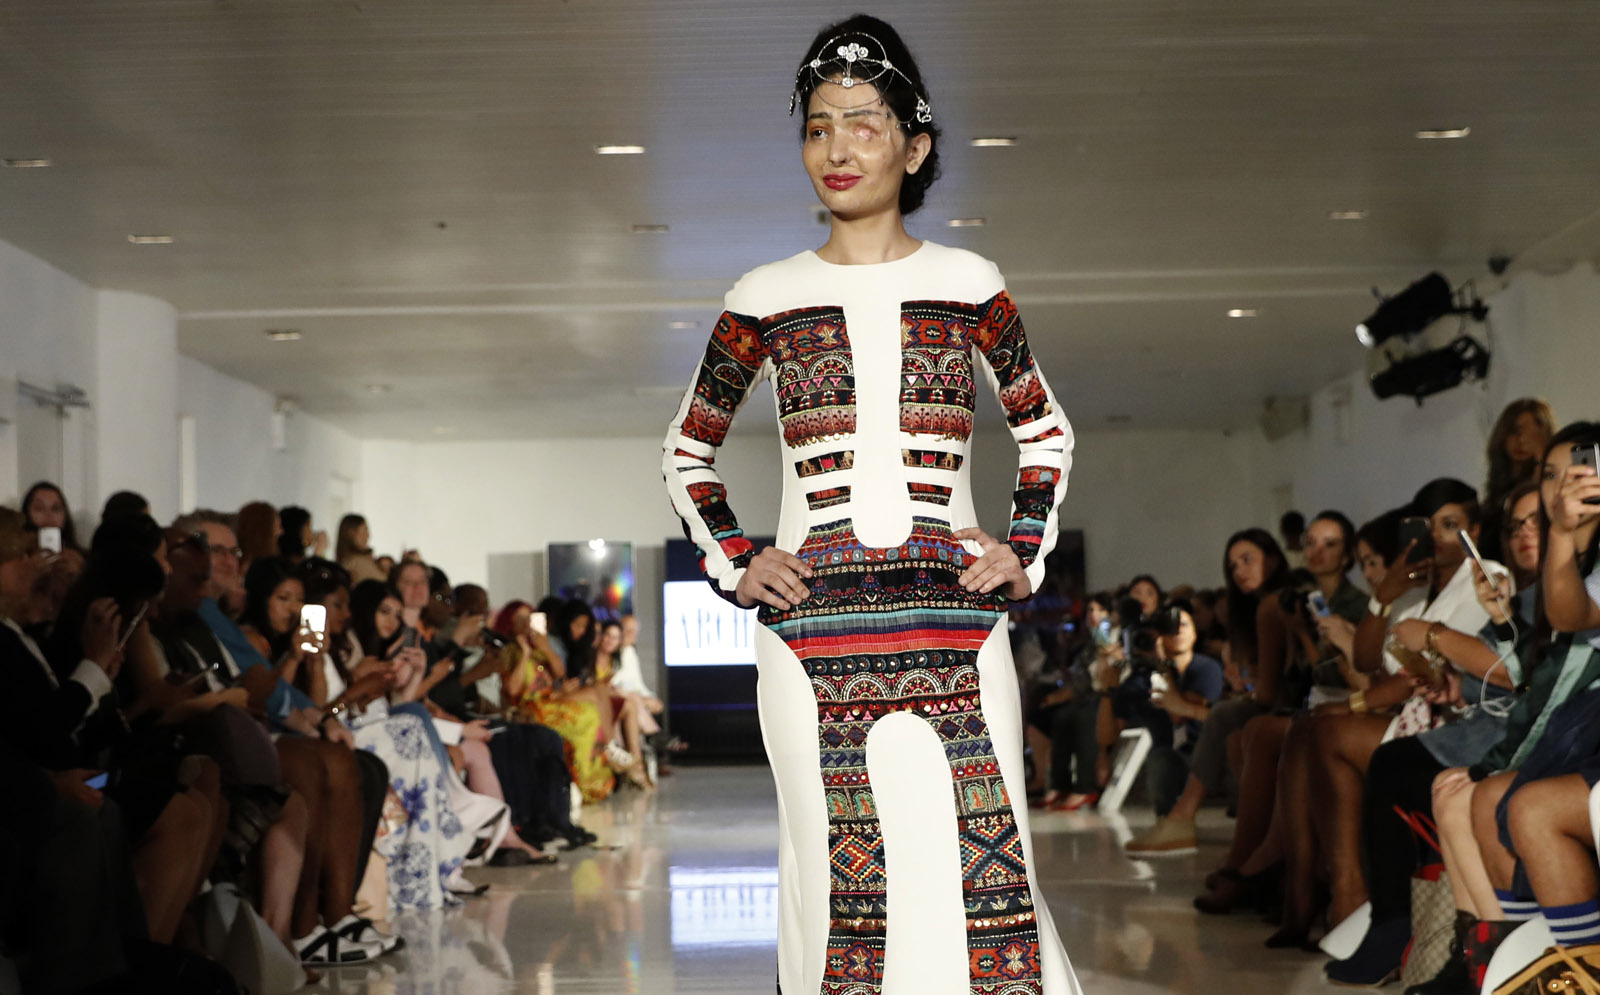 Model and acid attack victim Reshma Querishi models the Archana Kochhar collection during Fashion Week in New York, Thursday, Sept. 8, 2016. (AP Photo/Mary Altaffer)